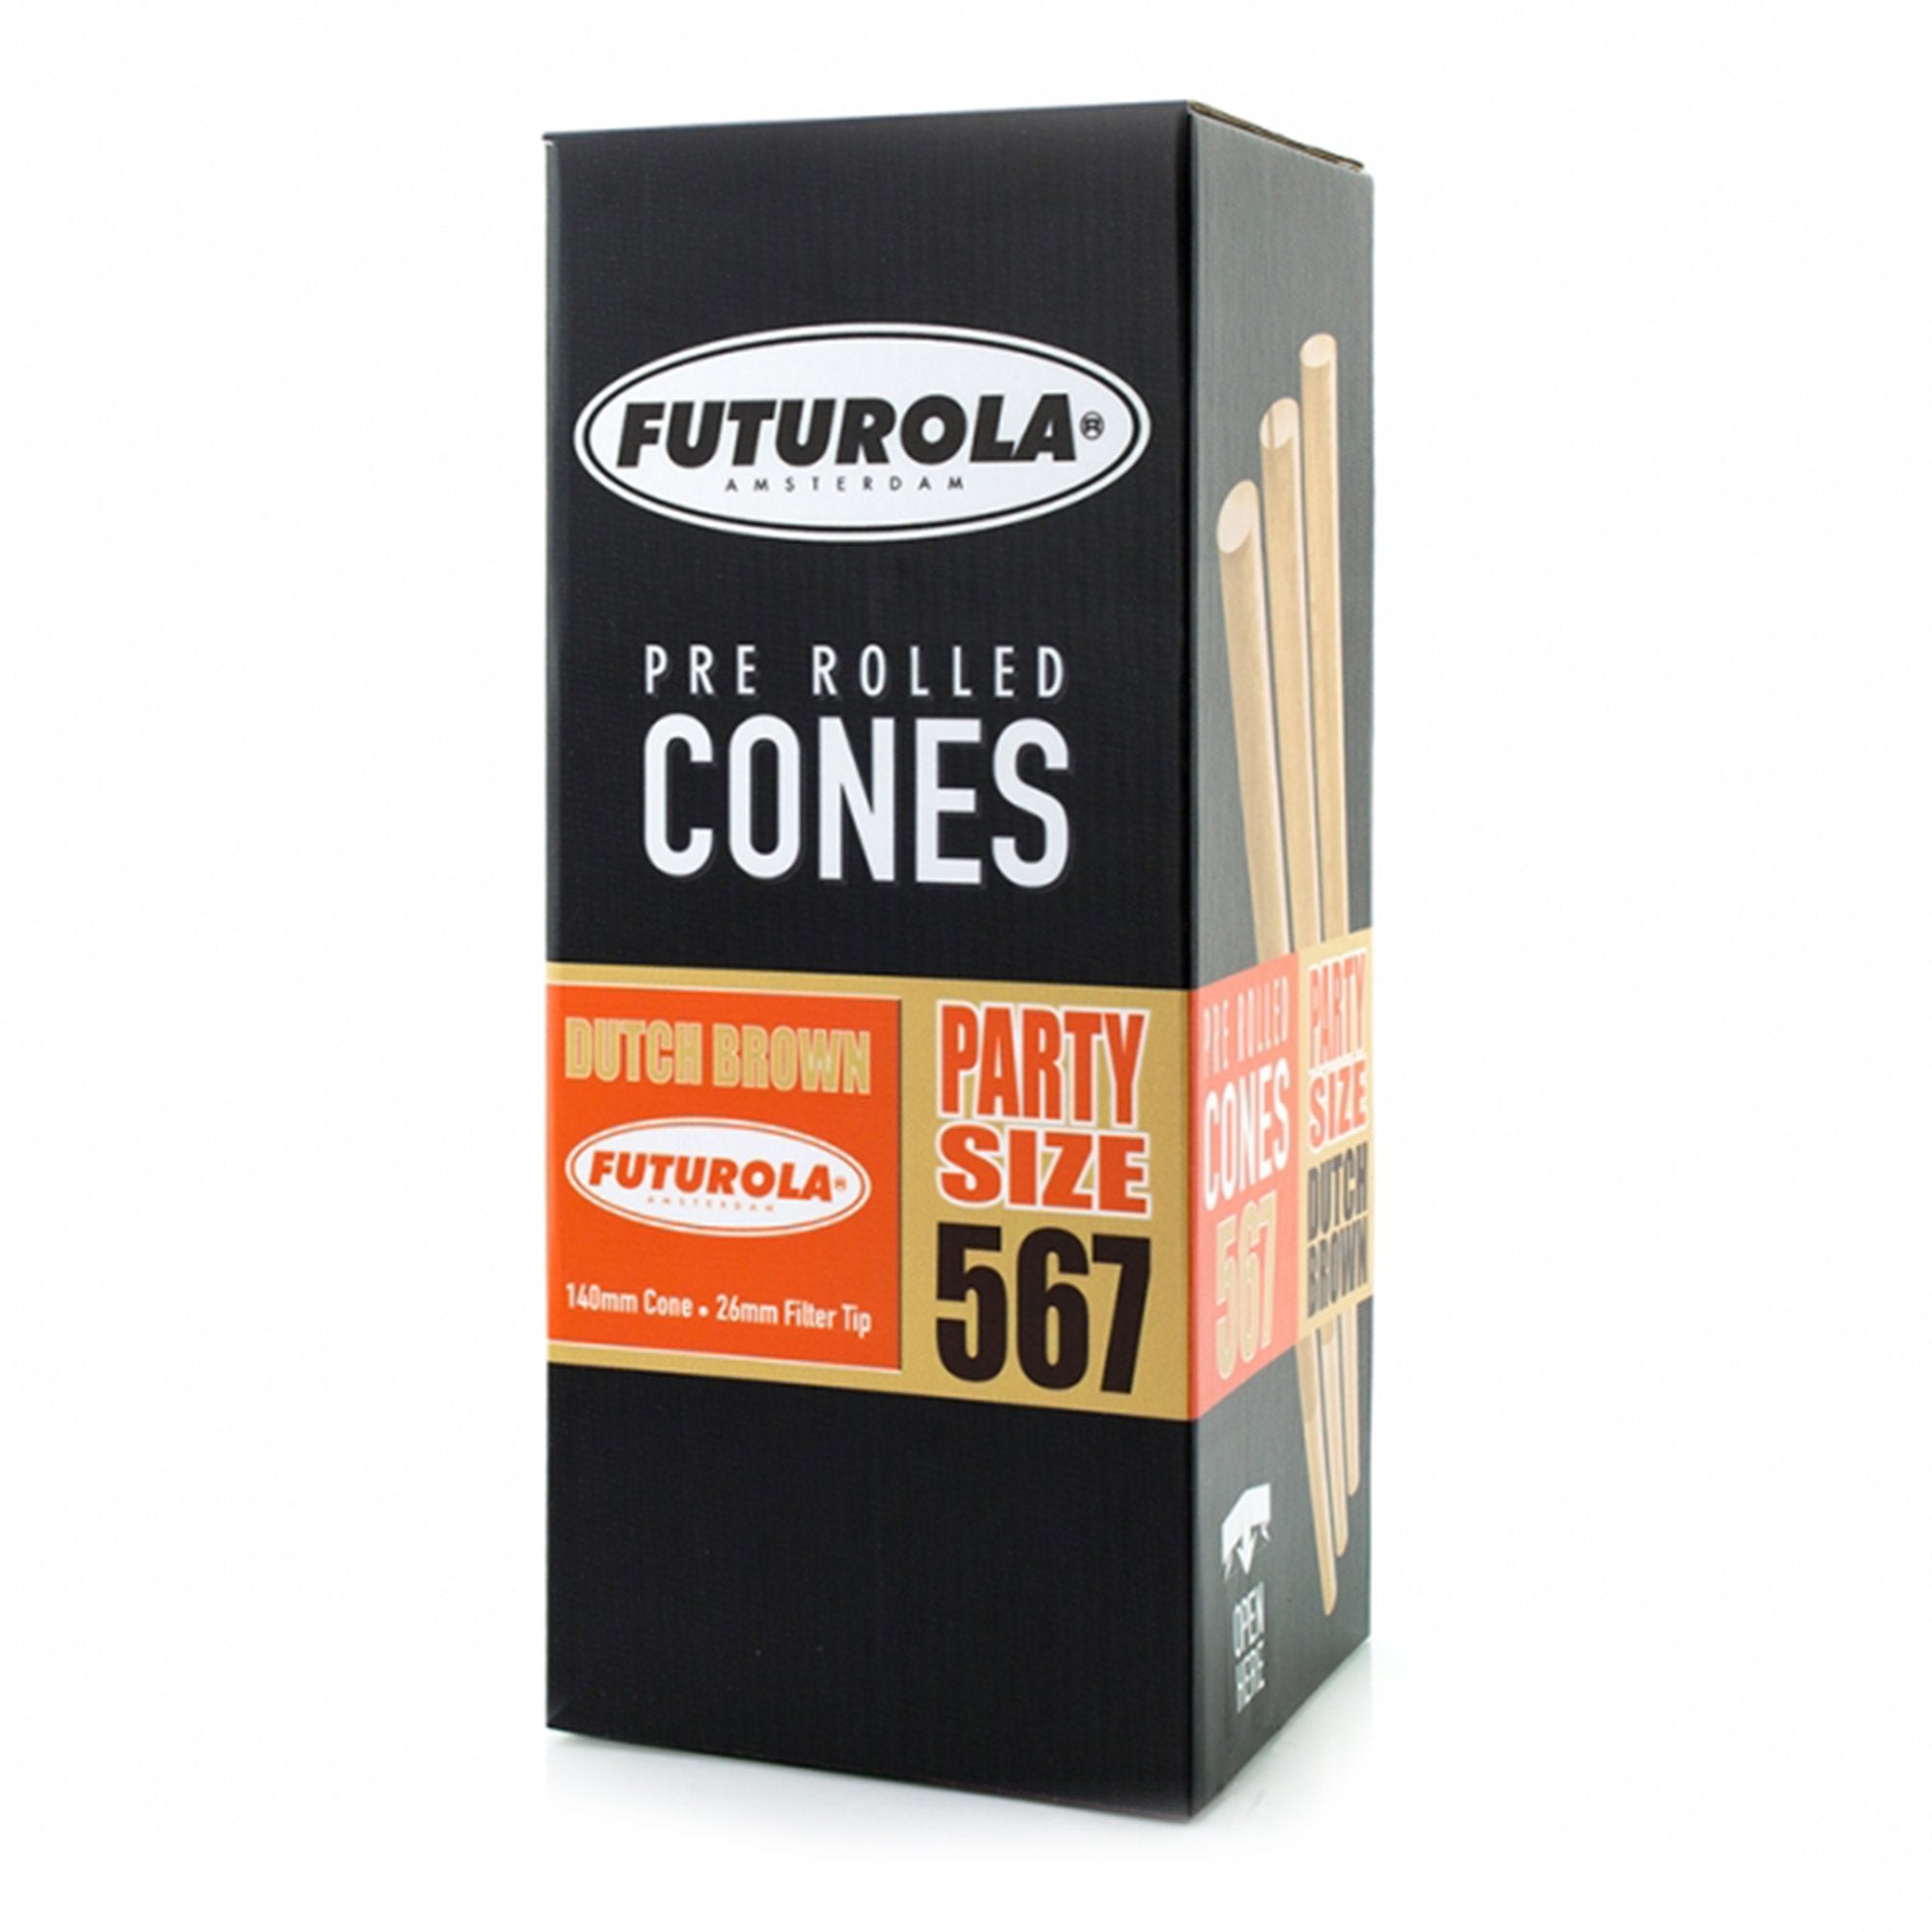 FUTUROLA | Party Size Pre-Rolled Cones | 140mm - Dutch Brown Paper - 567 Count - 1